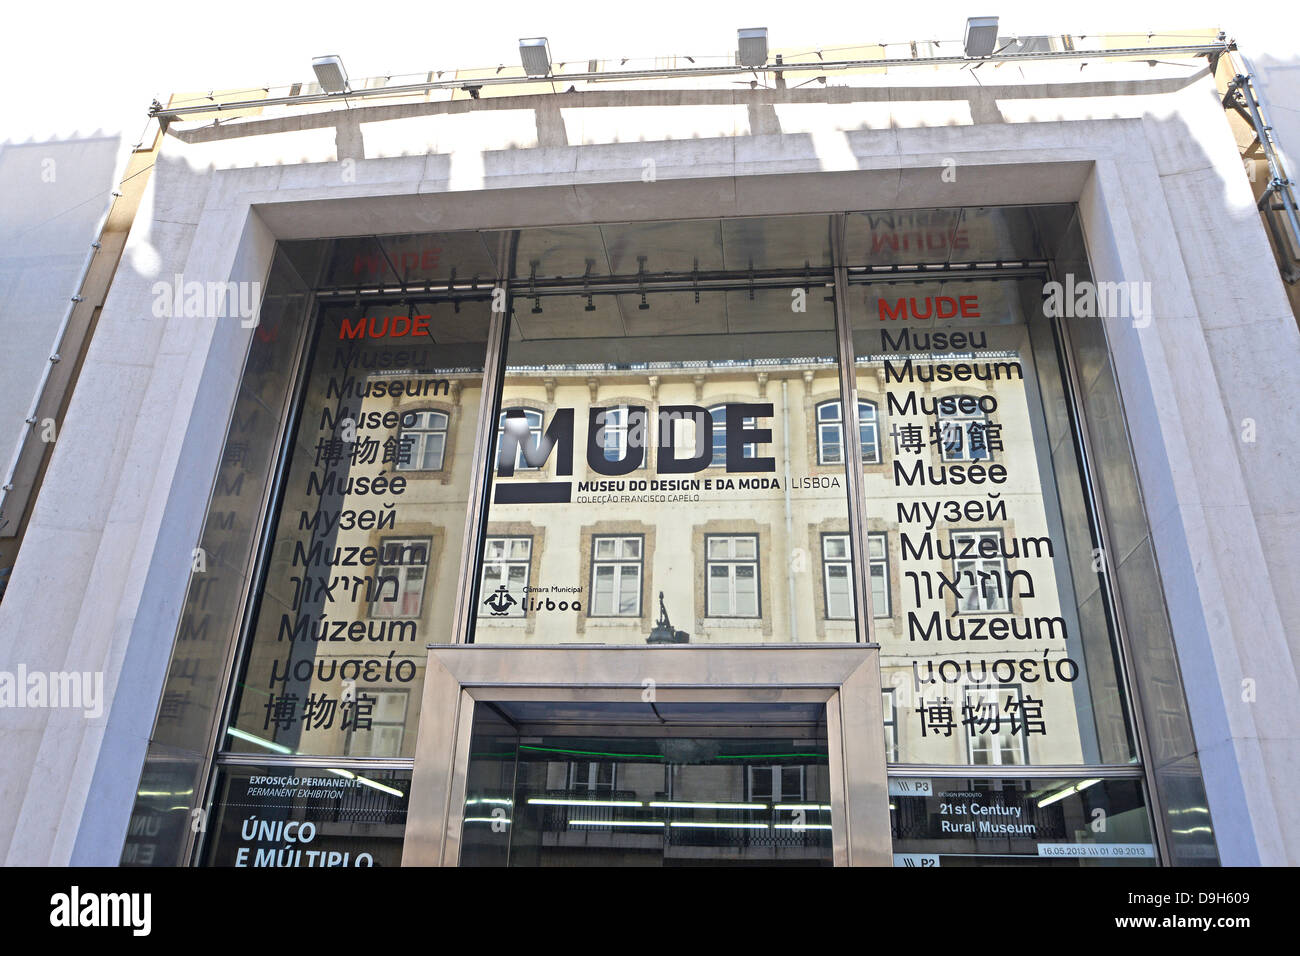 Mude Museum of design and fashion Lisbon Portugal Stock Photo